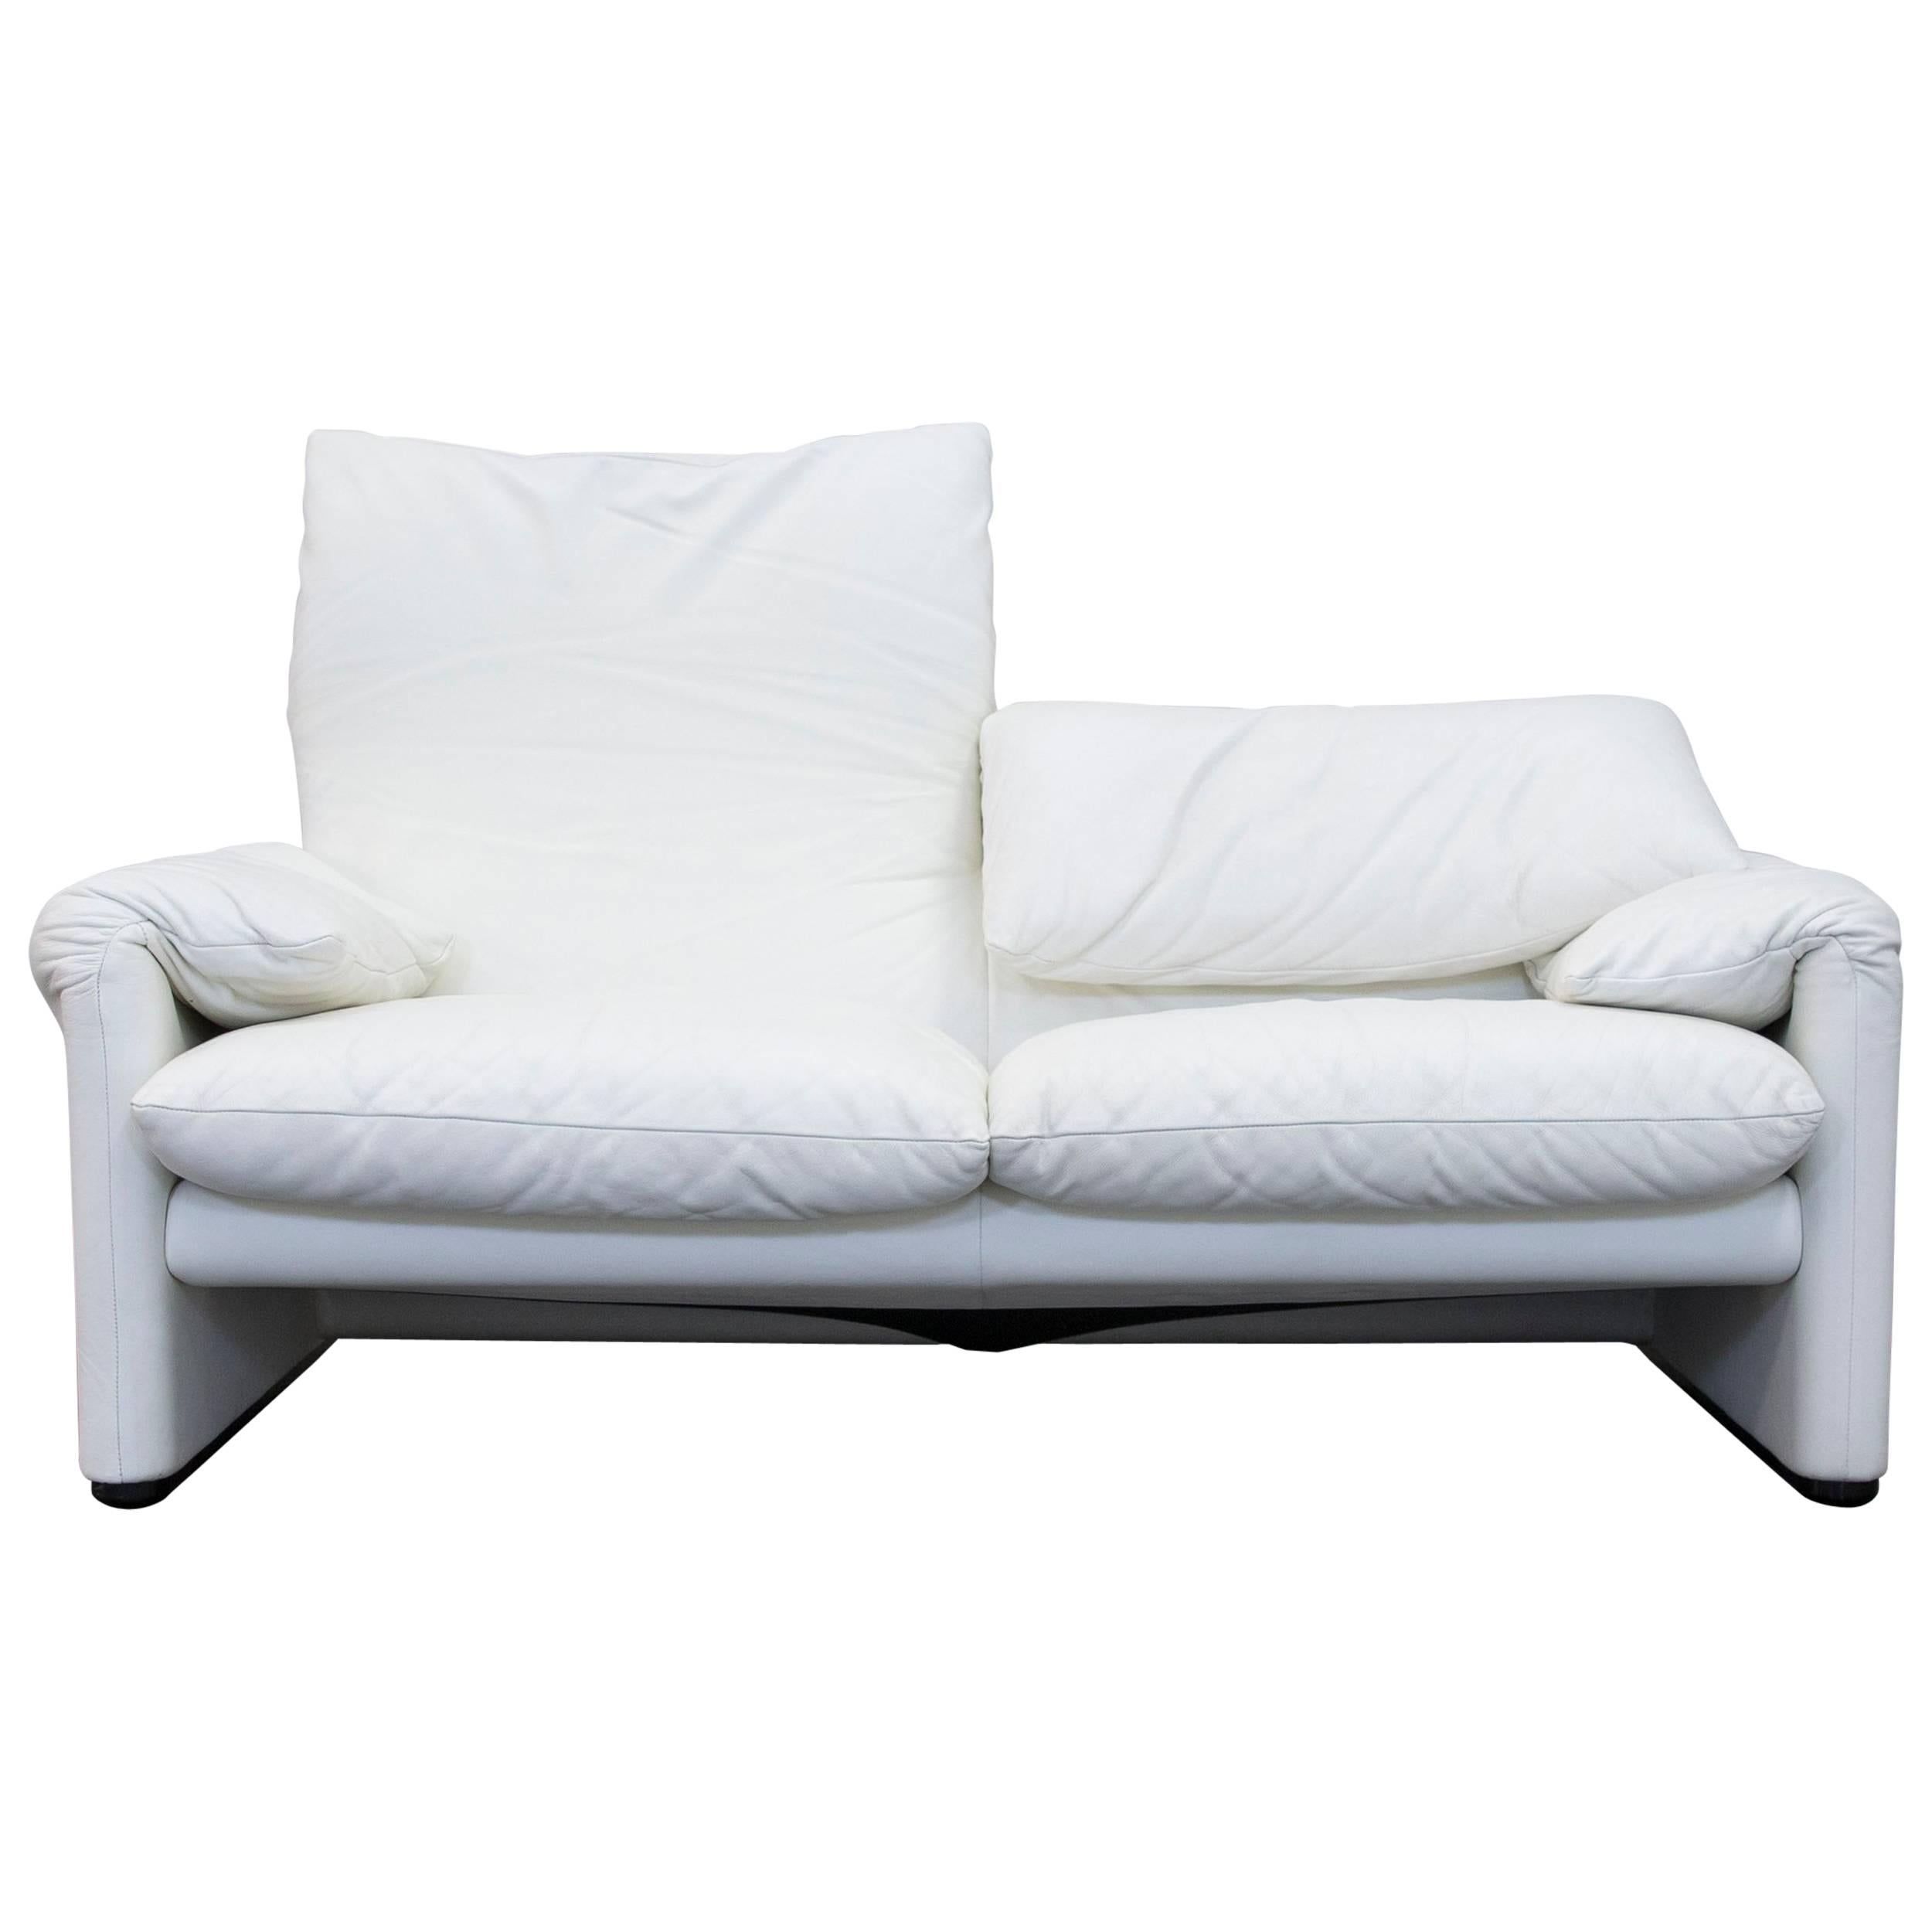 Cassina Maralunga Designer Sofa Leather White Two-Seat Function Couch Modern